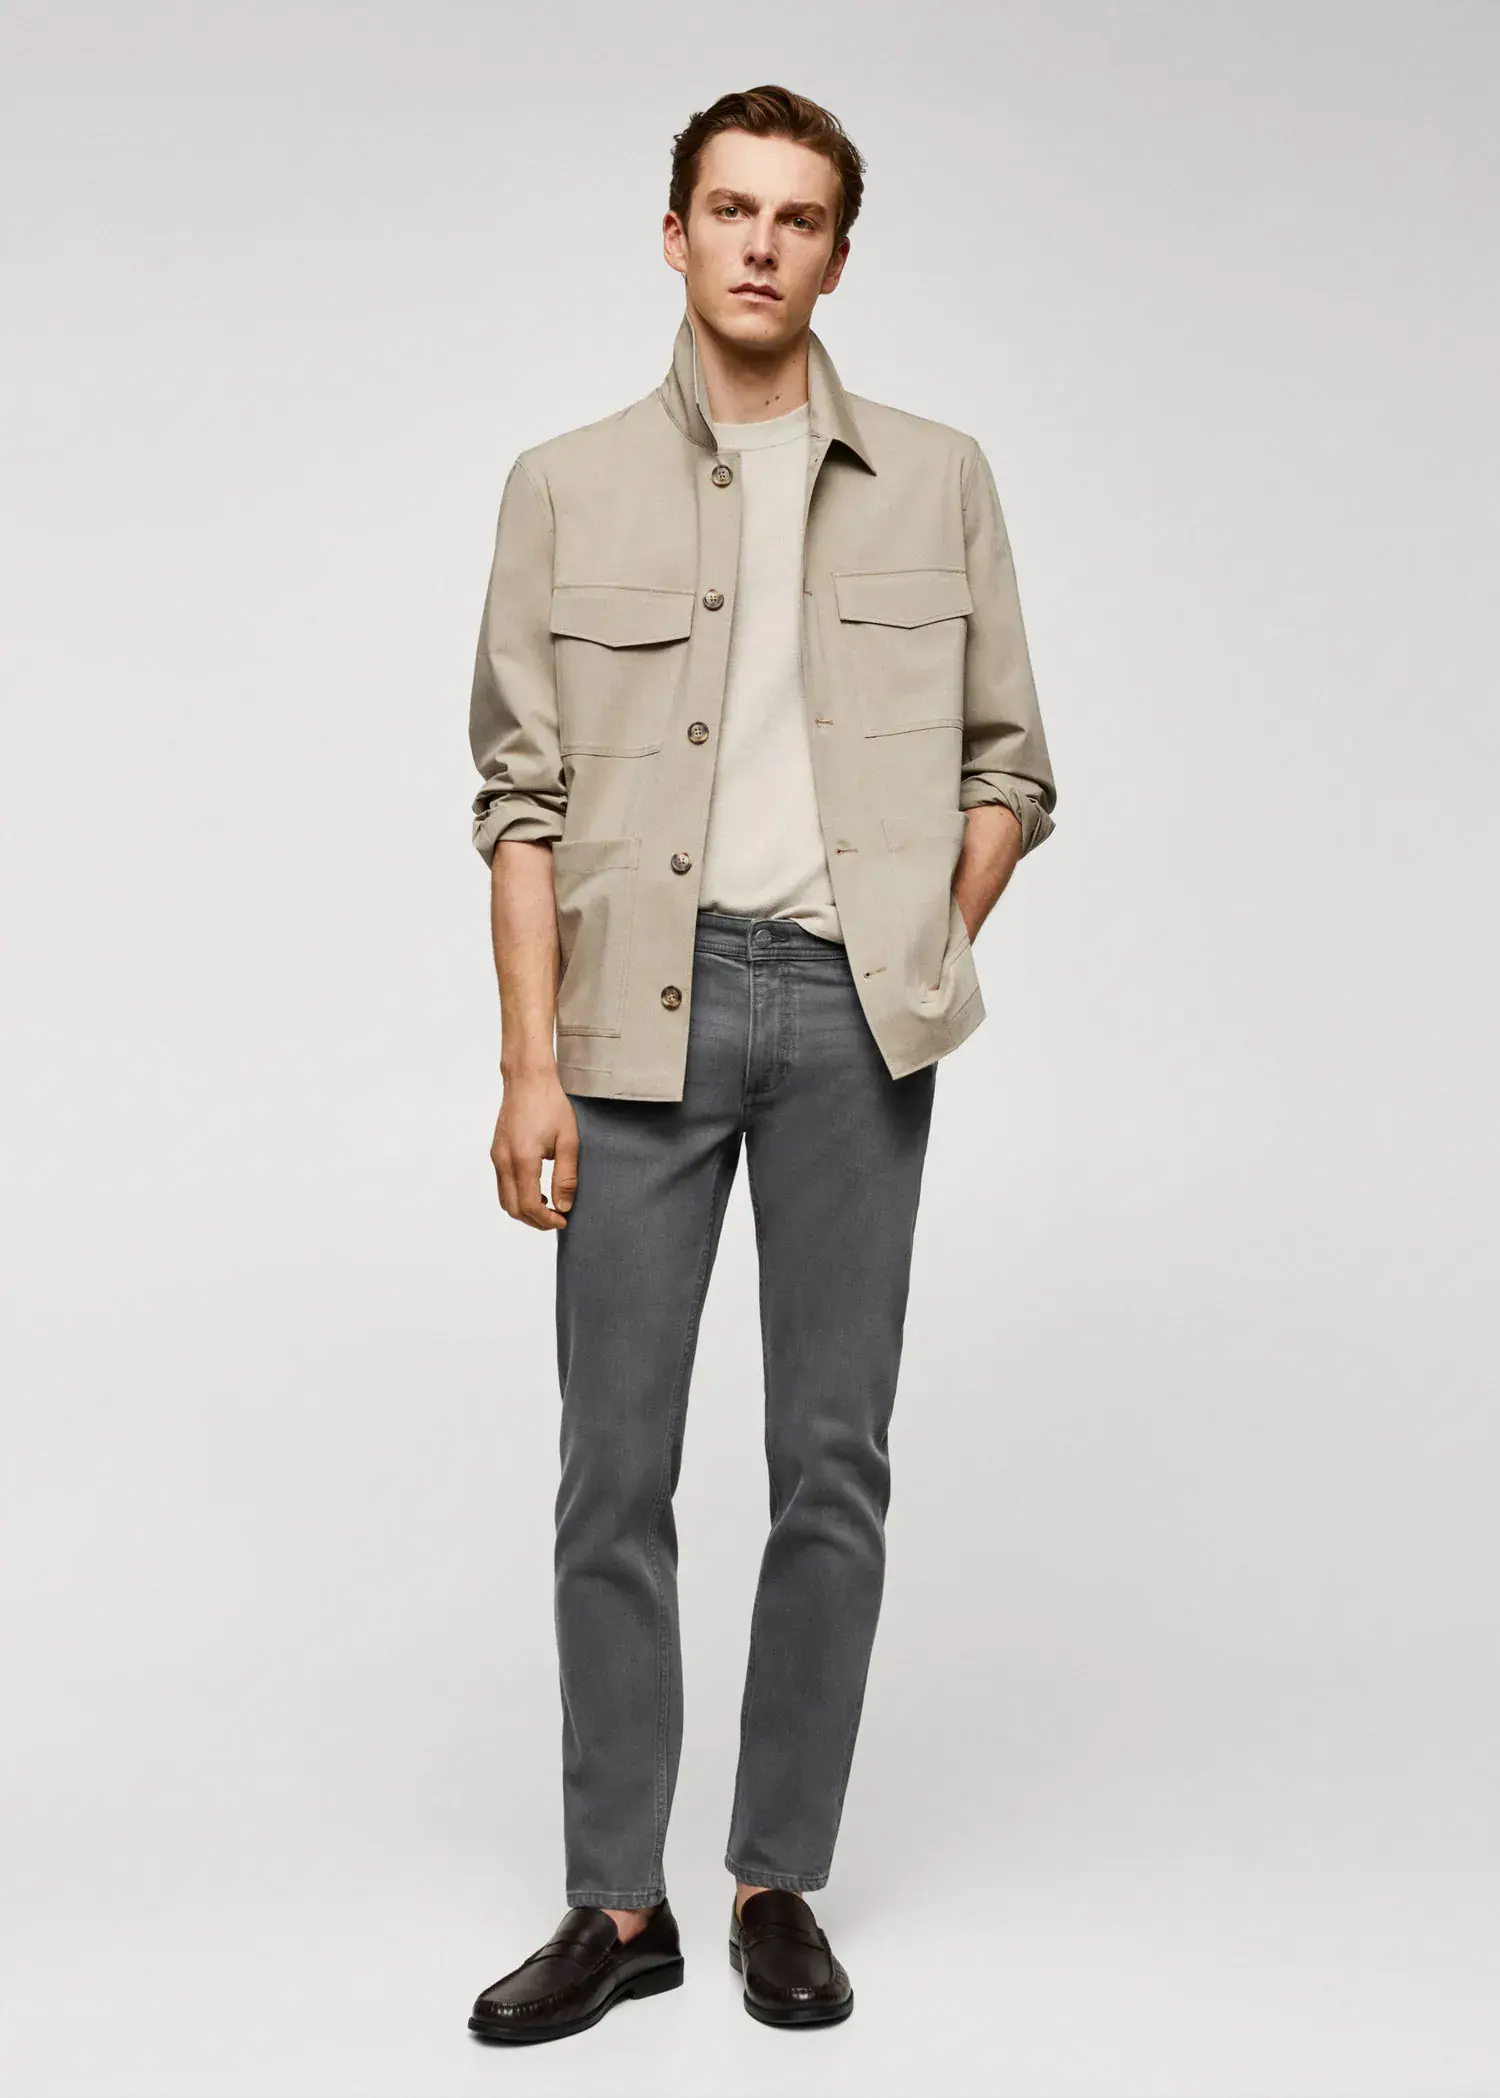 Mango Jan slim-fit jeans. a man in a tan jacket and gray pants. 